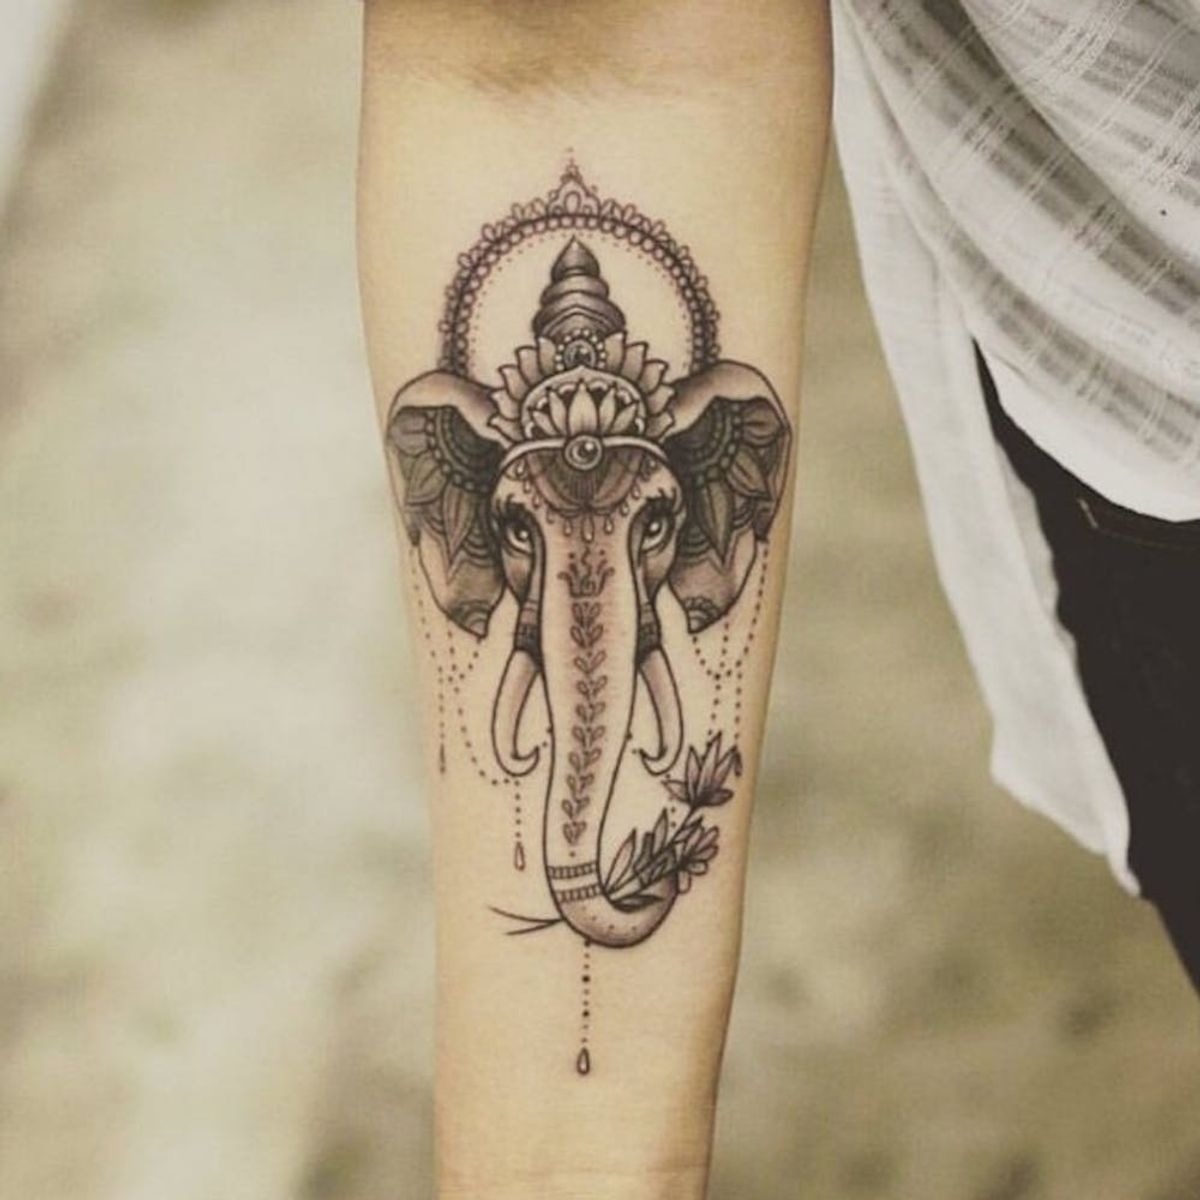 18 Totally Zen Yoga Tattoos to Keep You Centered